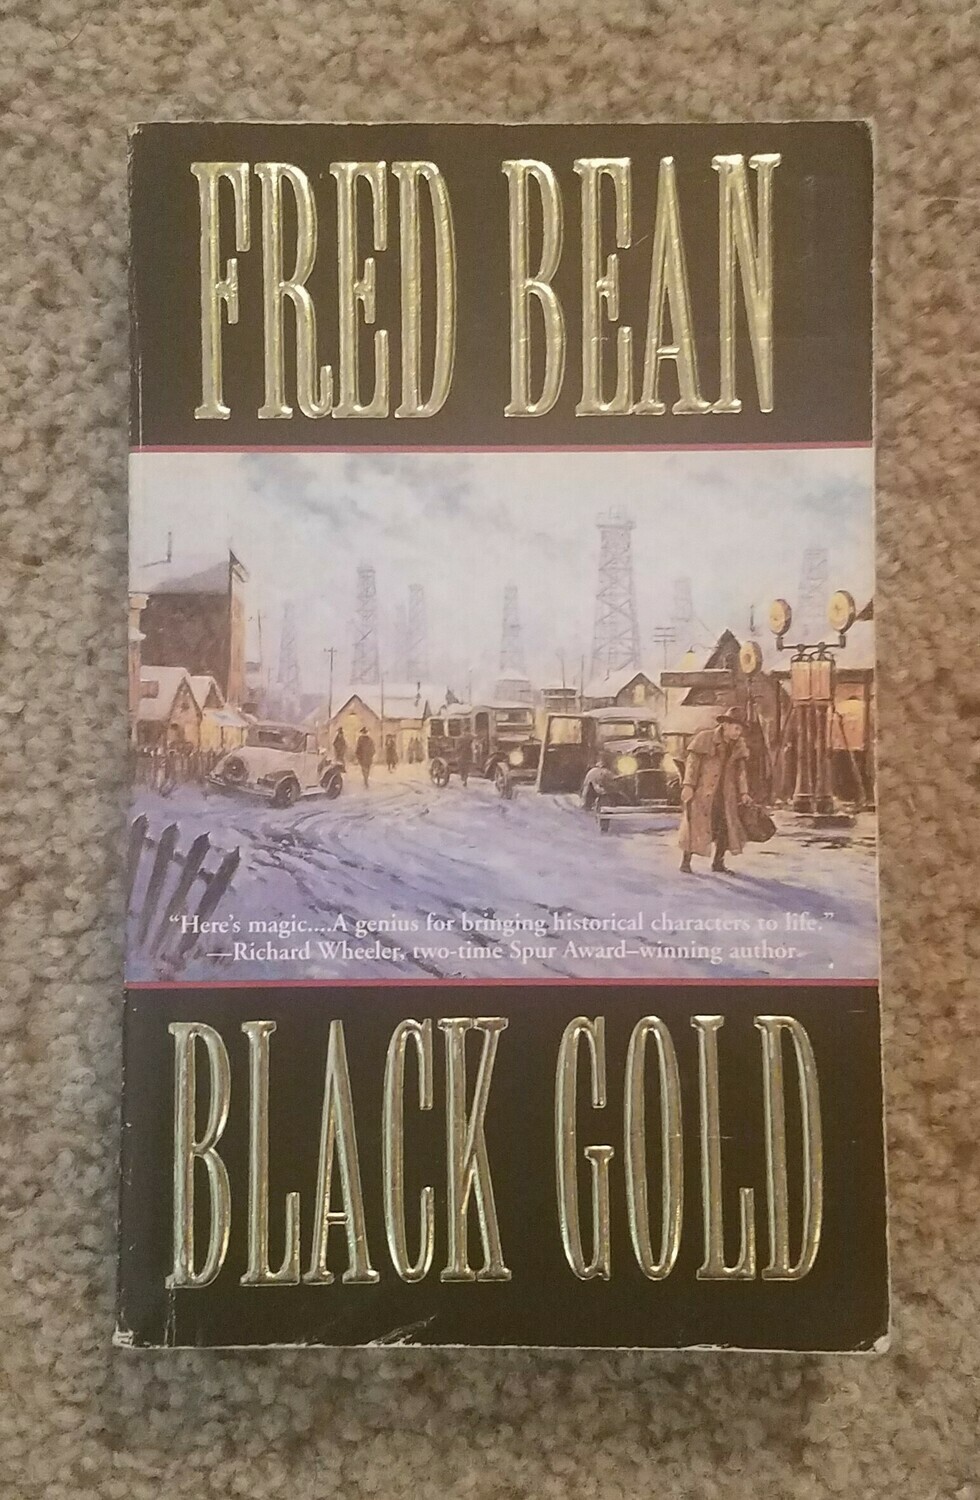 Black Gold by Fred Bean